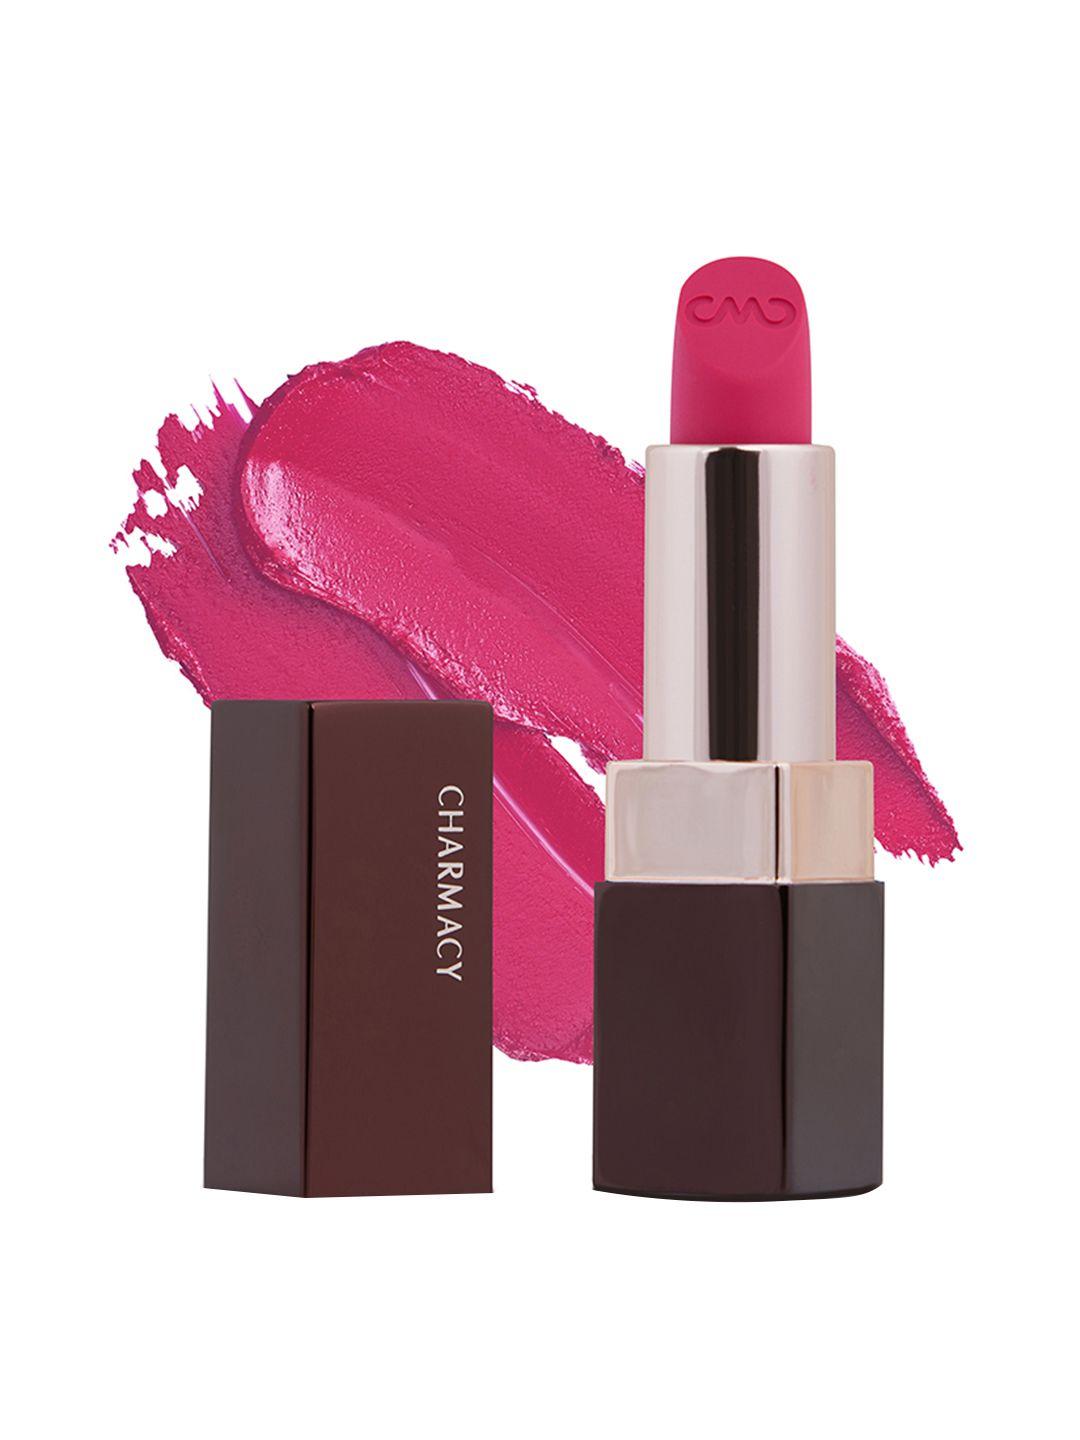 charmacy milano soft satin matte high-coverage hydrating lipstick 3.8g - fiery rose 53